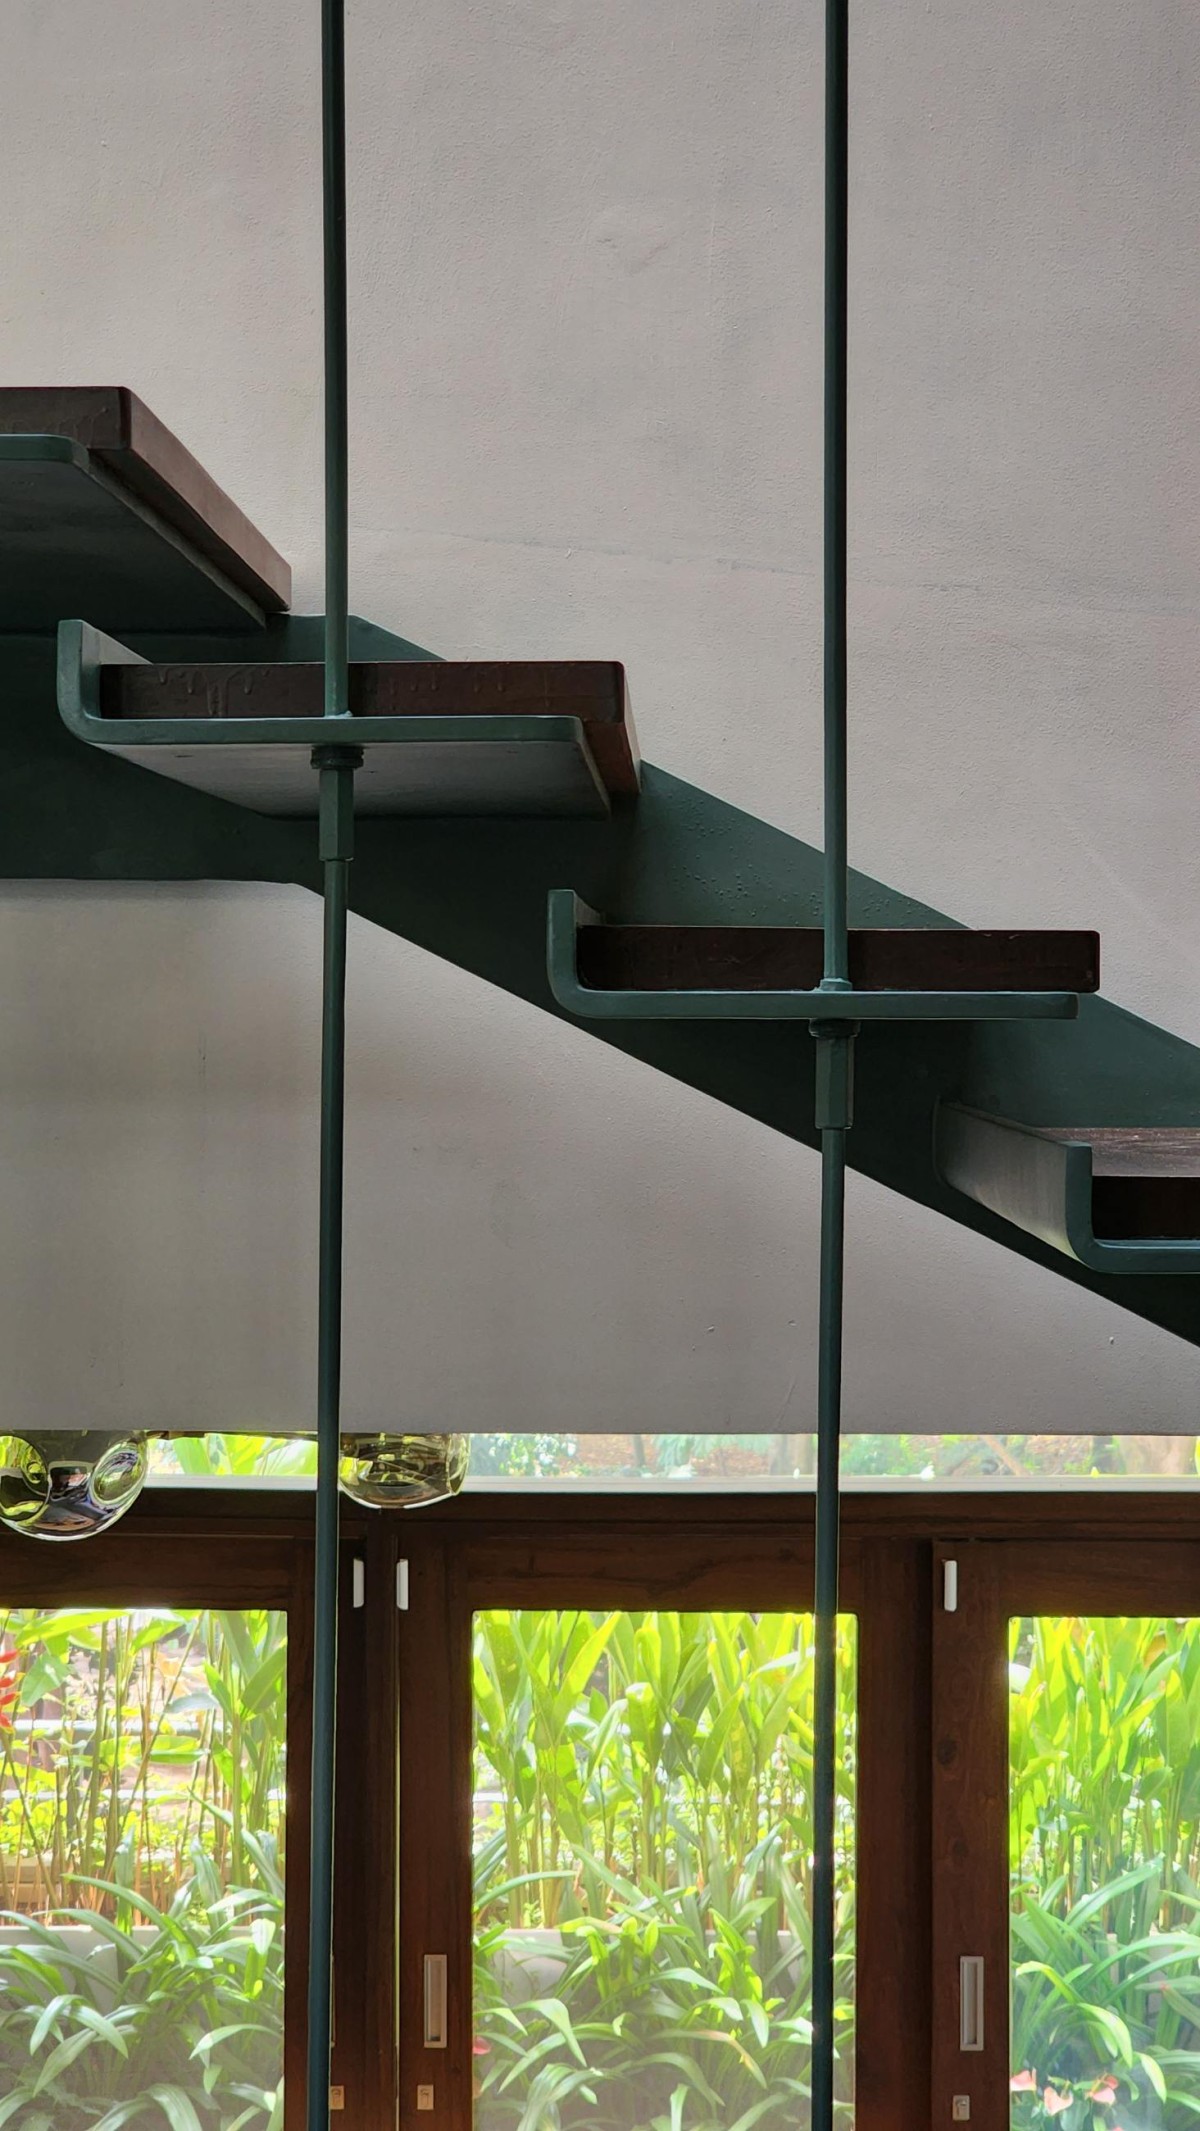 Step detail-Nairy’s residence by Funktion design